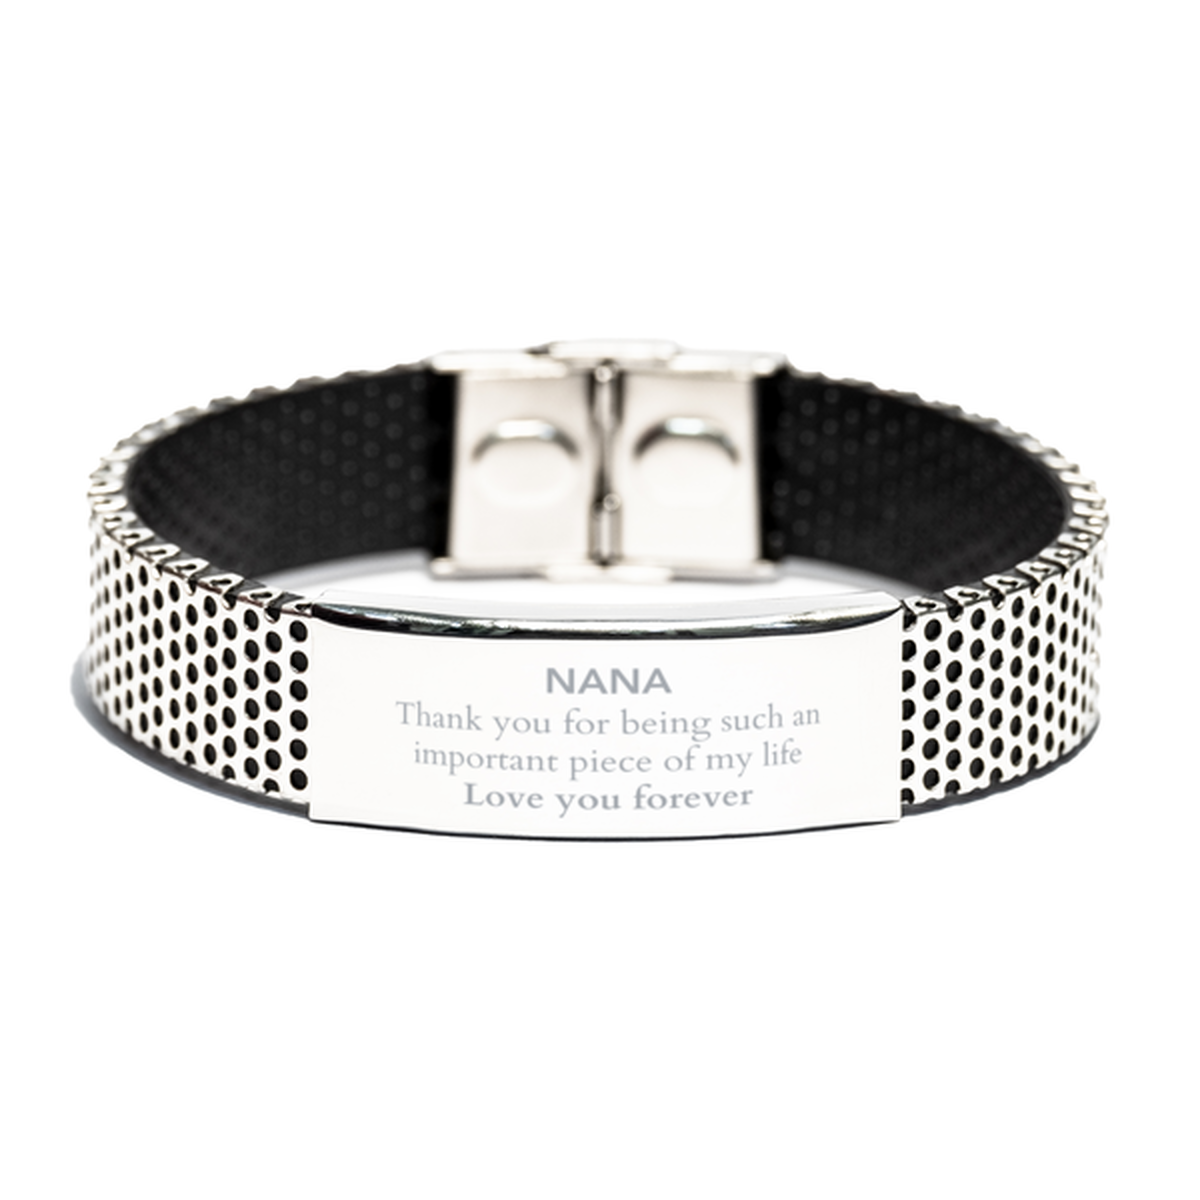 Appropriate Nana Stainless Steel Bracelet Epic Birthday Gifts for Nana Thank you for being such an important piece of my life Nana Christmas Mothers Fathers Day